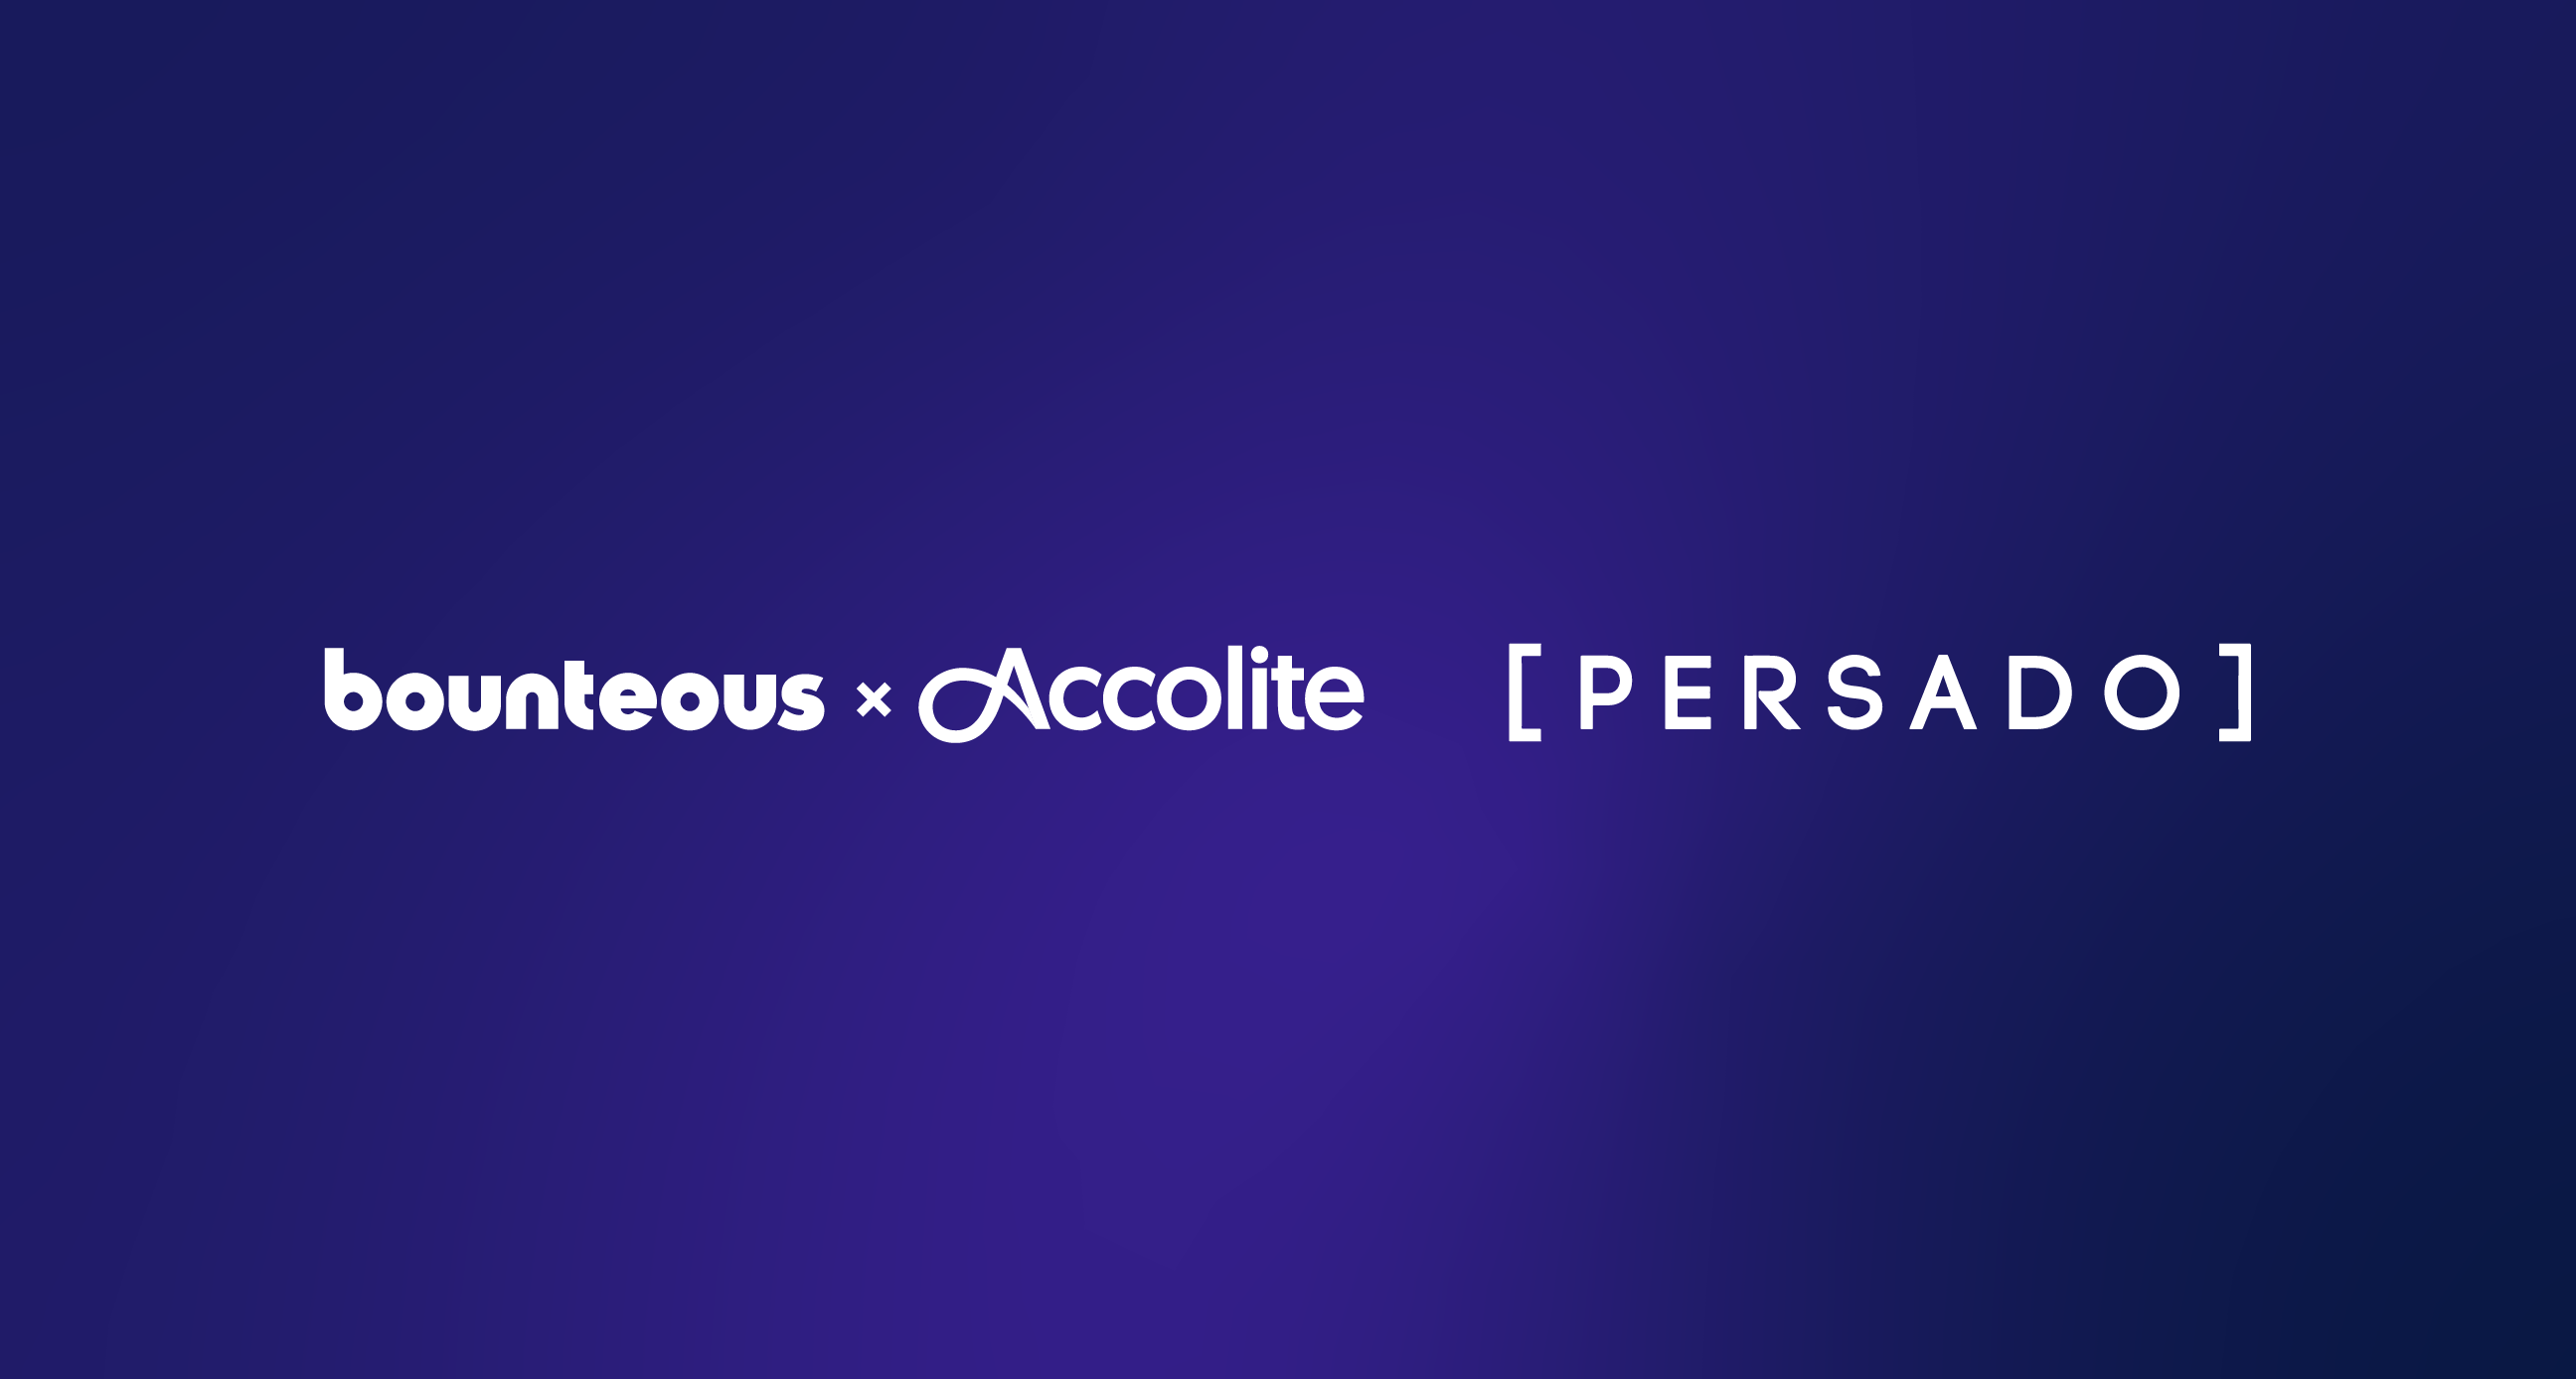 Bounteous x Accolite and Persado Partner to Offer Measurably Better Digital Customer Experiences Fueled By GenAI